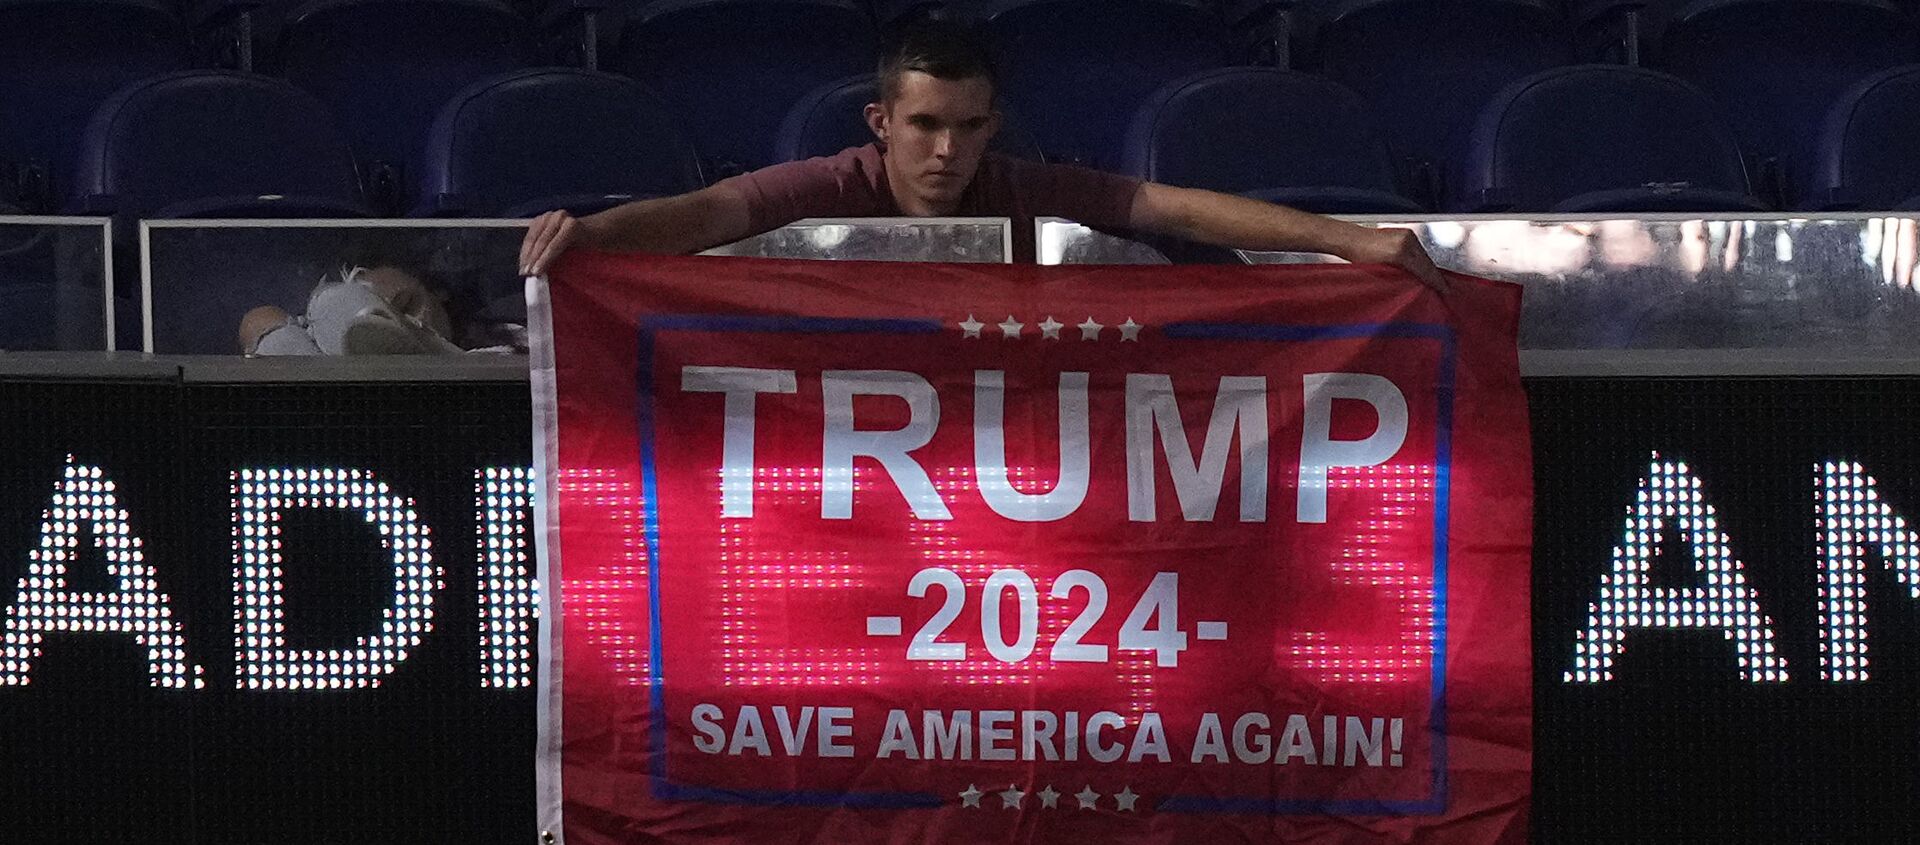 A fan displays a flag in support of former president Donald Trump in the upper deck after the game between the Miami Marlins and the San Diego Padres at loanDepot park - Sputnik International, 1920, 25.07.2021